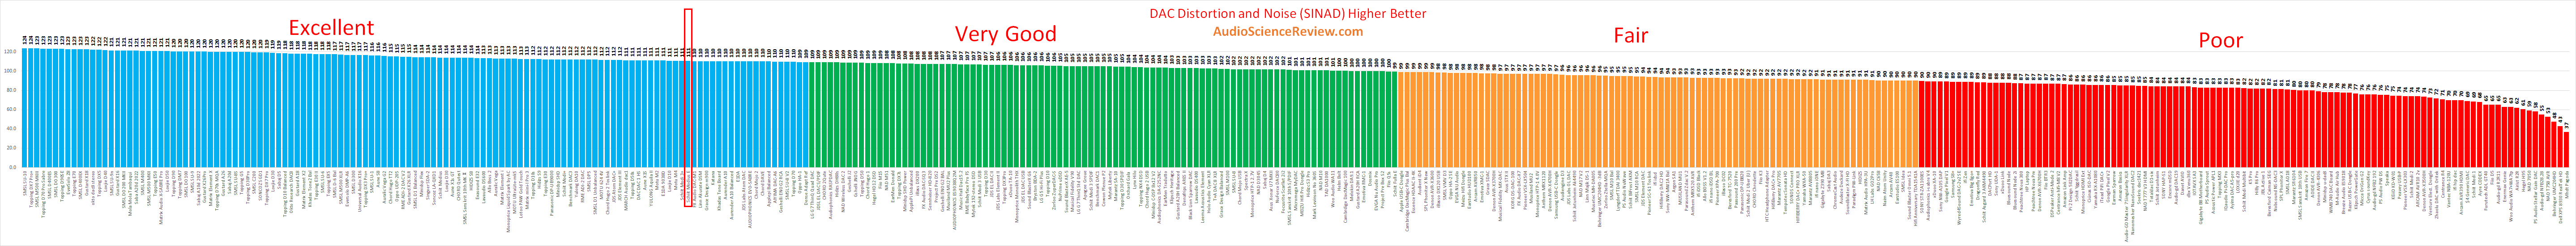 Best balanced dac USB stereo review 2023.png